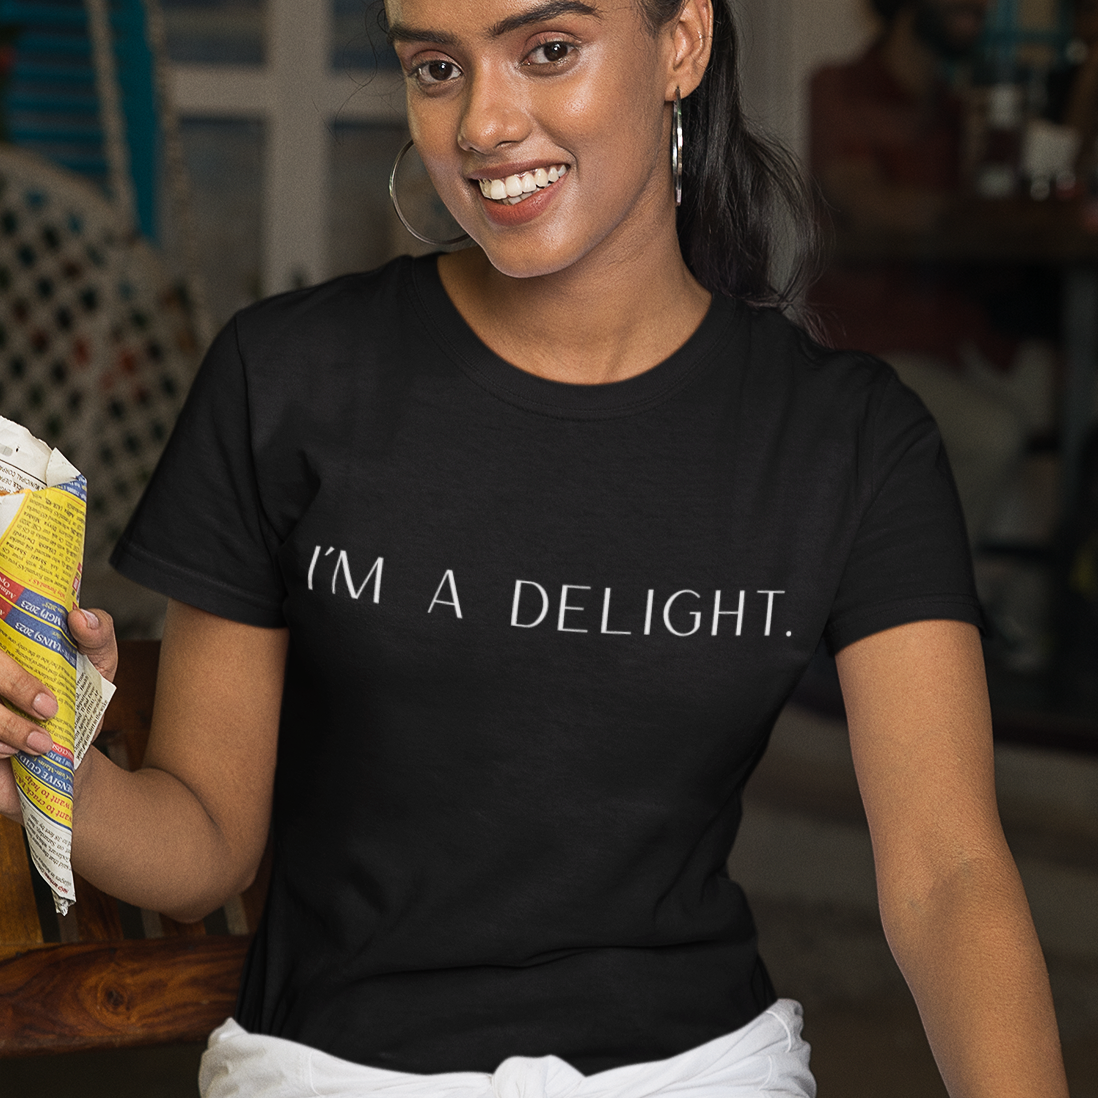 im-a-delight-white-t-shirt-womens-funny-sarcastic-mockup-of-a-smiling-woman-posing-with-an-indian-snack